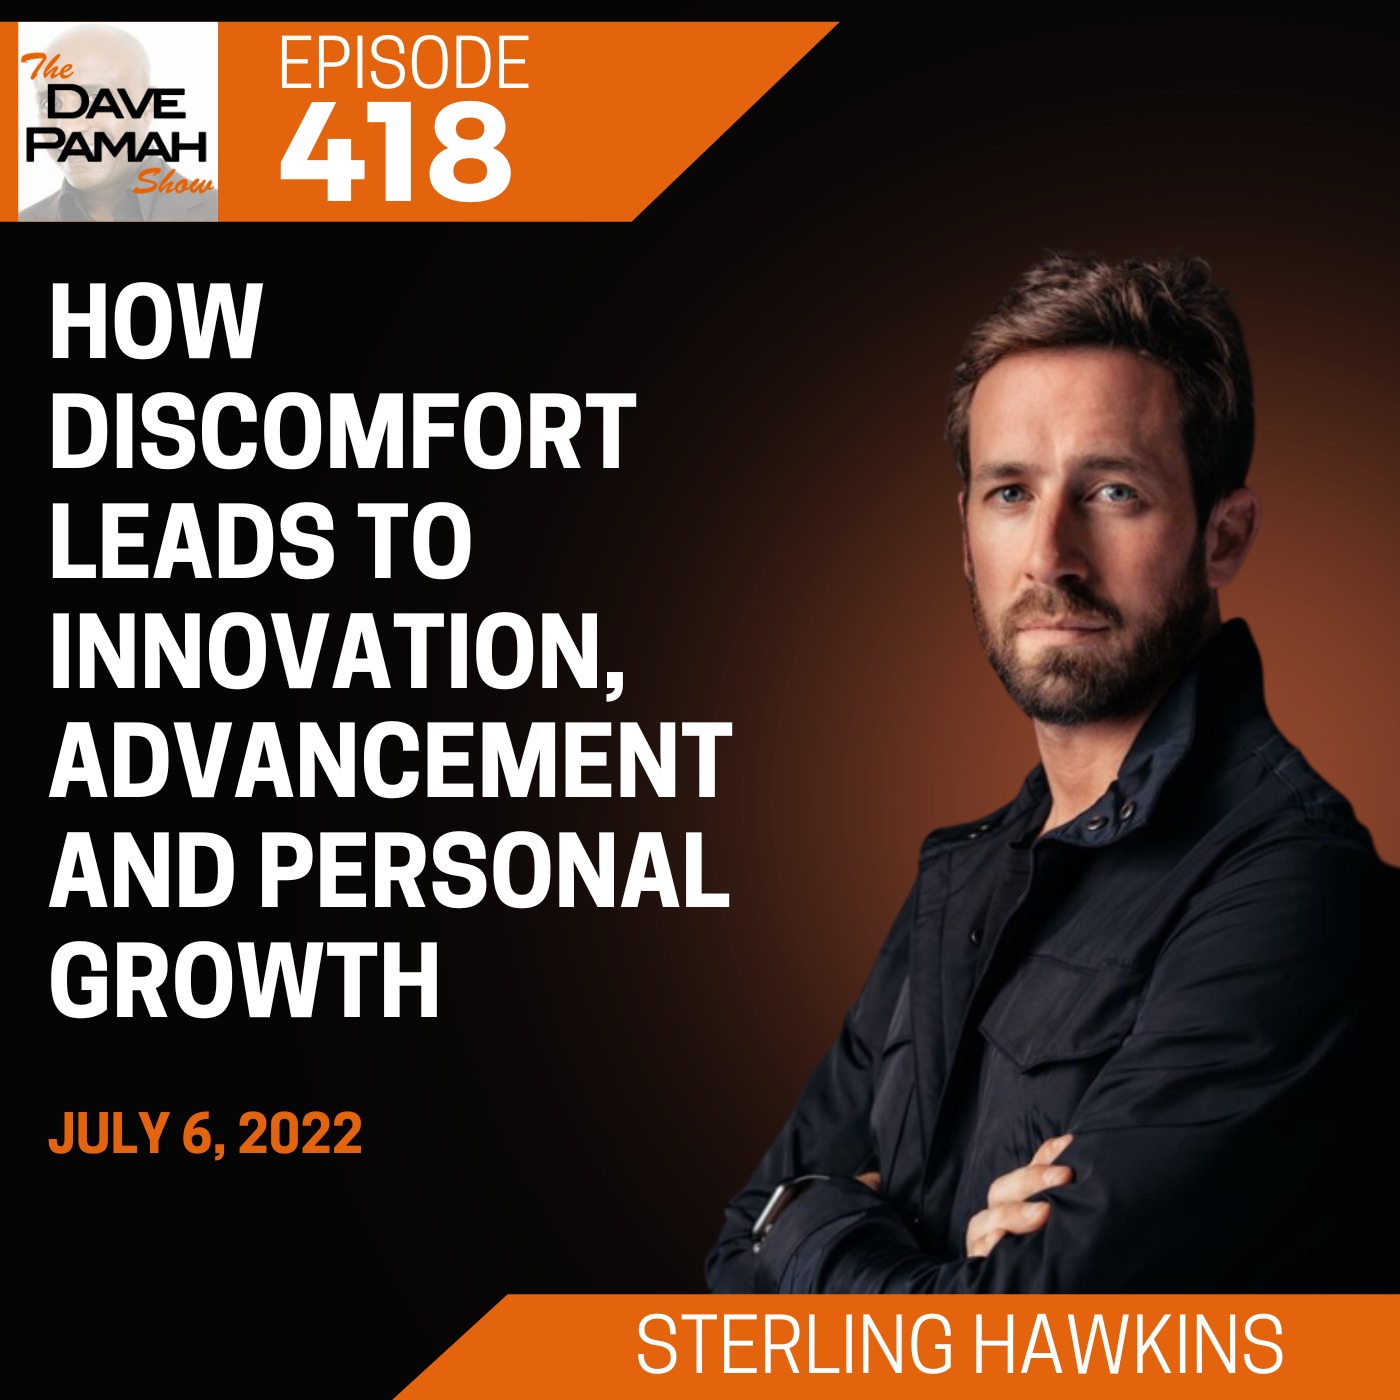 How Discomfort Leads to Innovation, Advancement and Personal Growth with Sterling Hawkins Image